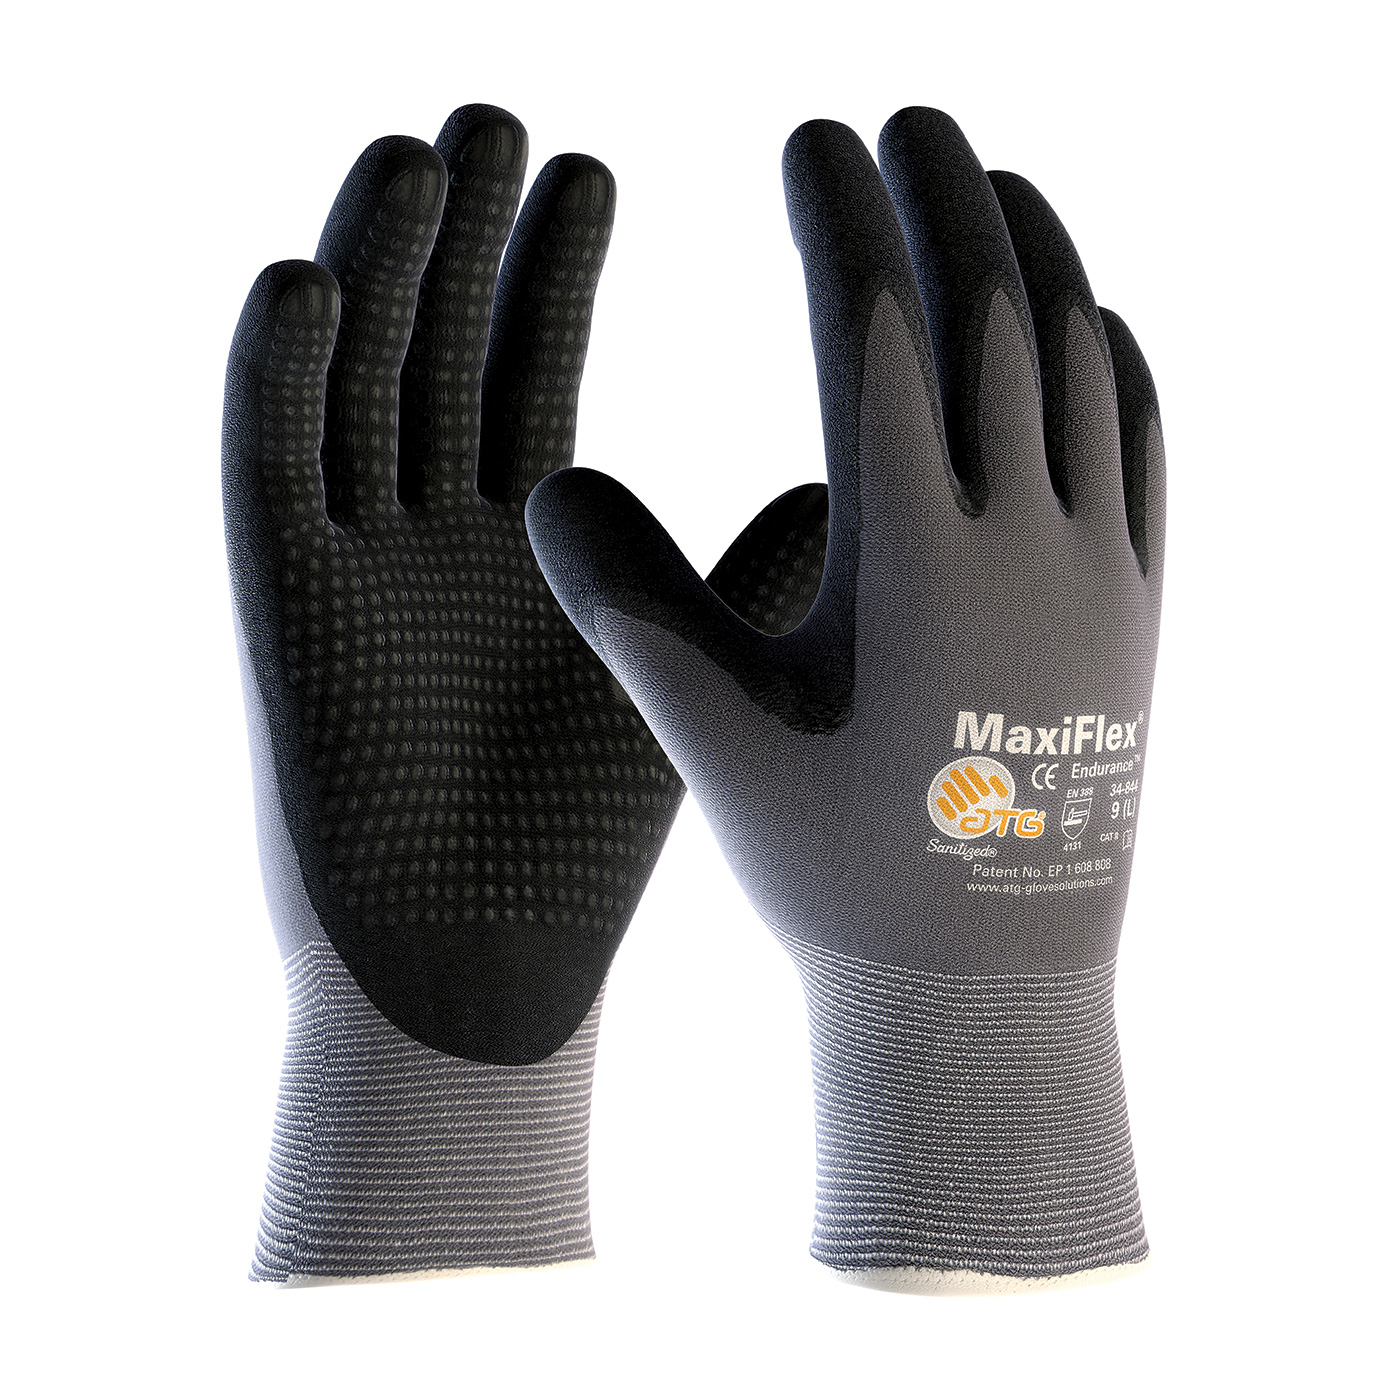 PIP 34-844/L MaxiFlex Endurance Seamless Knit Nylon Glove with Nitrile Coated MicroFoam Grip on Palm & Fingers - Micro Dot Palm - Large PID-34 844 L